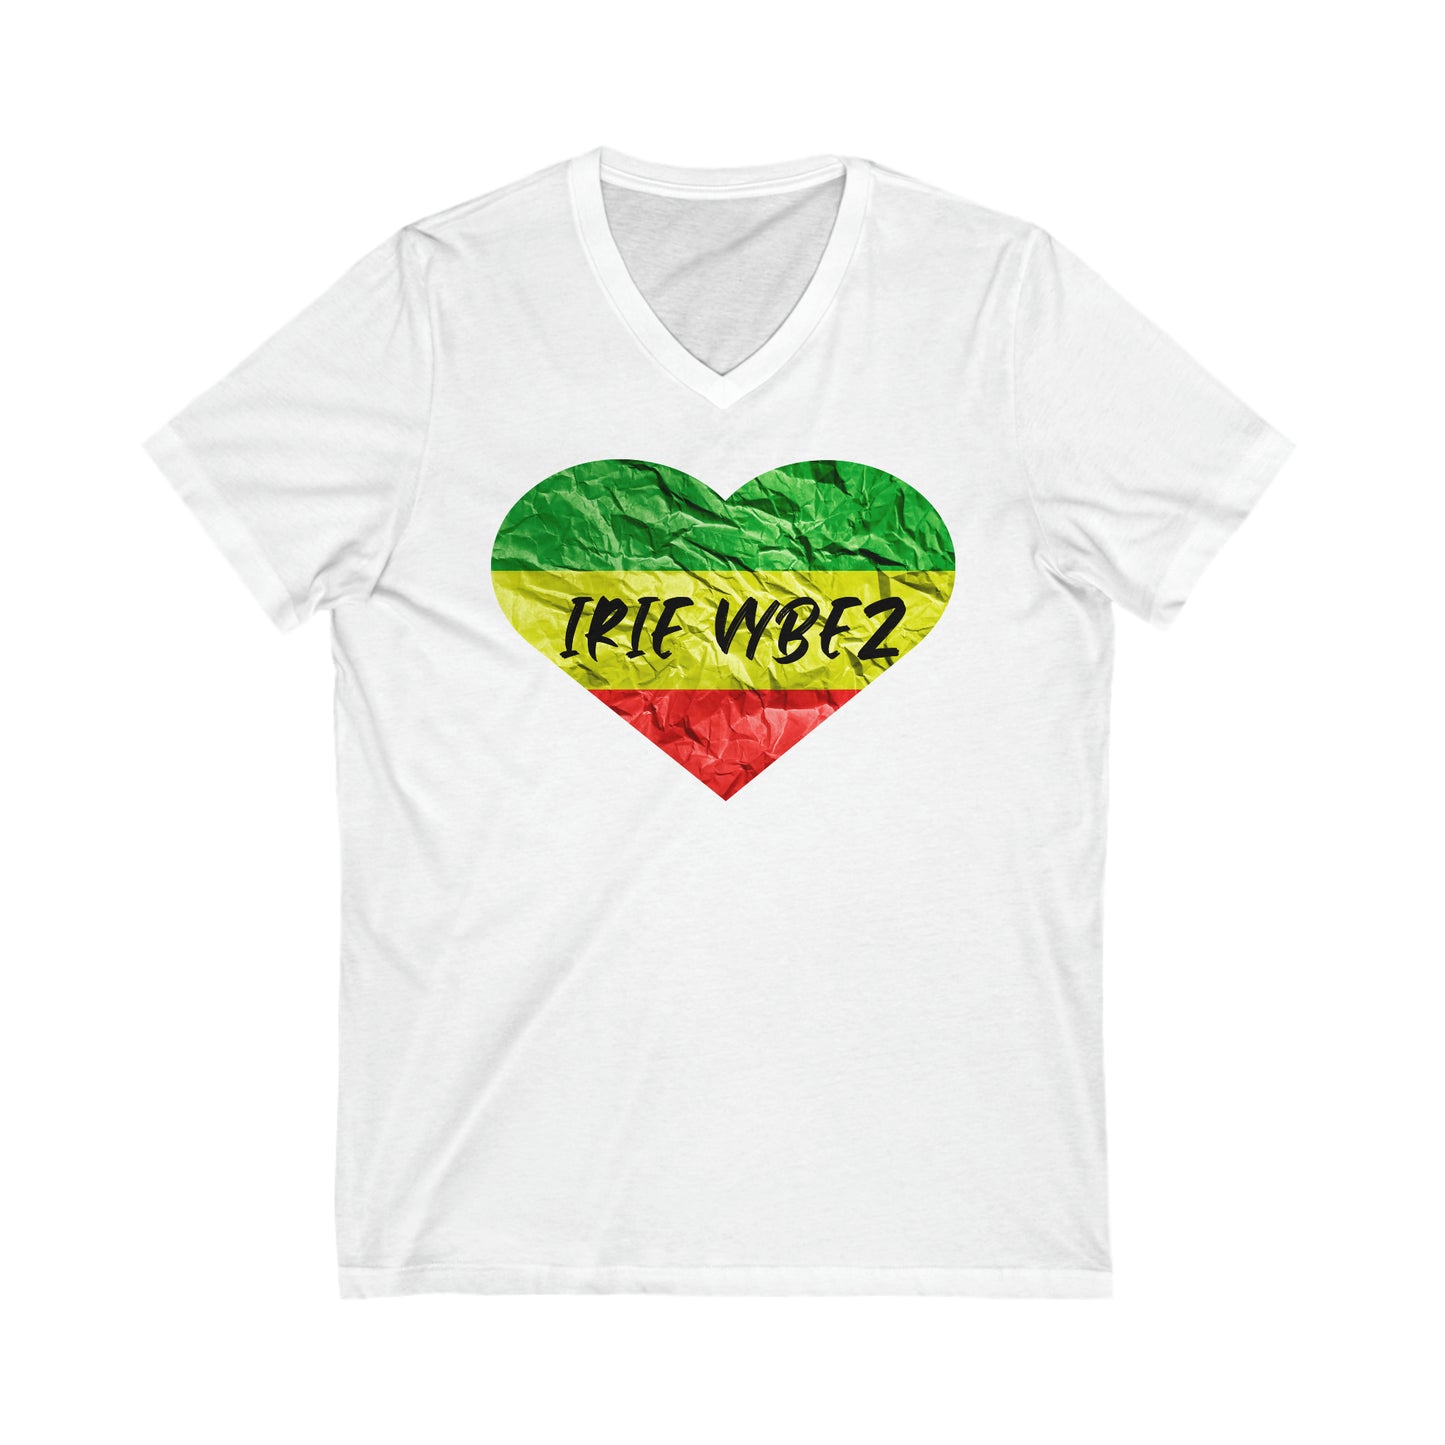 IRIE VYBEZ ROOTS CONSCIOUS V NECK TEE SHIRT